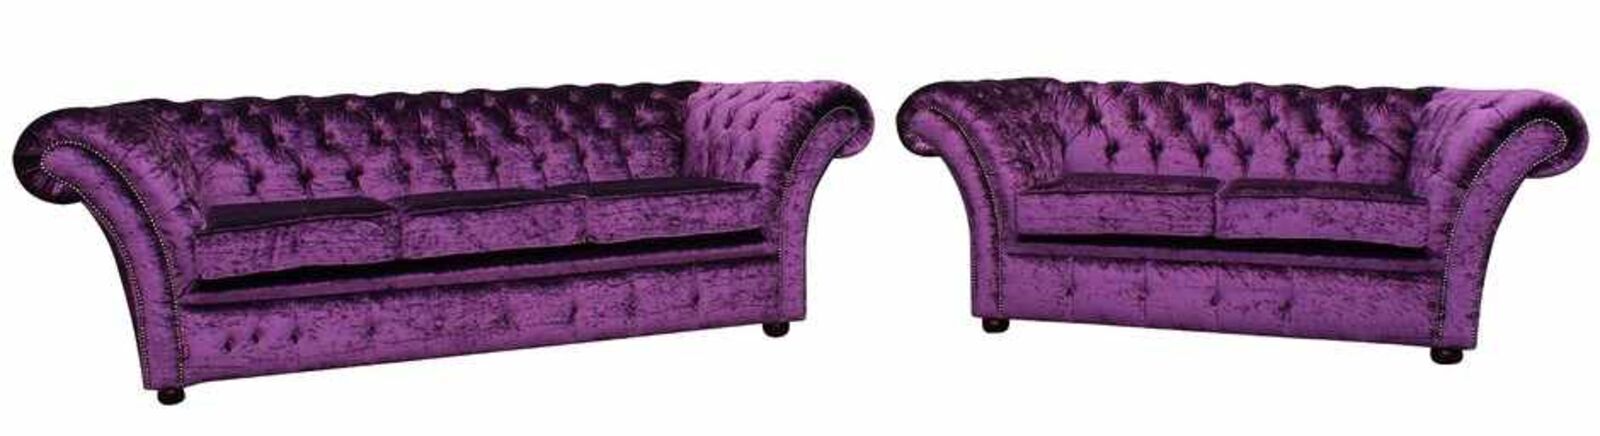 Product photograph of Chesterfield Drummond Purple 3 2 Seater Sofa Settee Suite Boutique Crush Velvet Fabric from Designer Sofas 4U